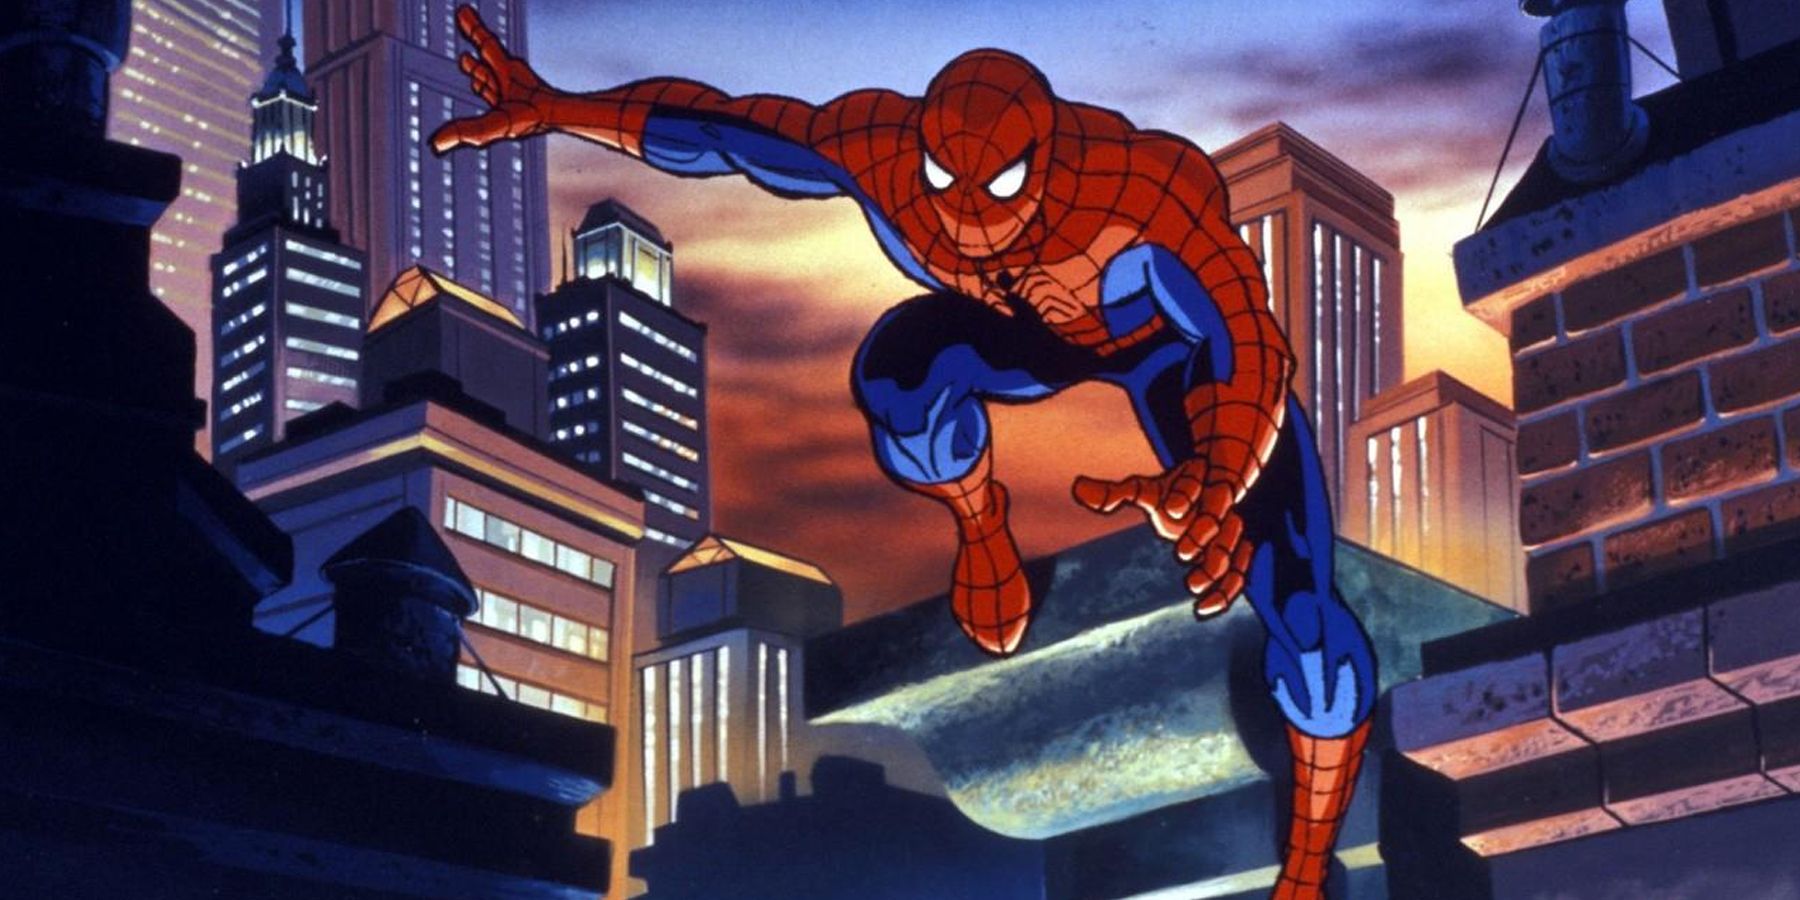 Spider-Man runs on rooftops in New York City at dawn in Spider-Man The Animated Series